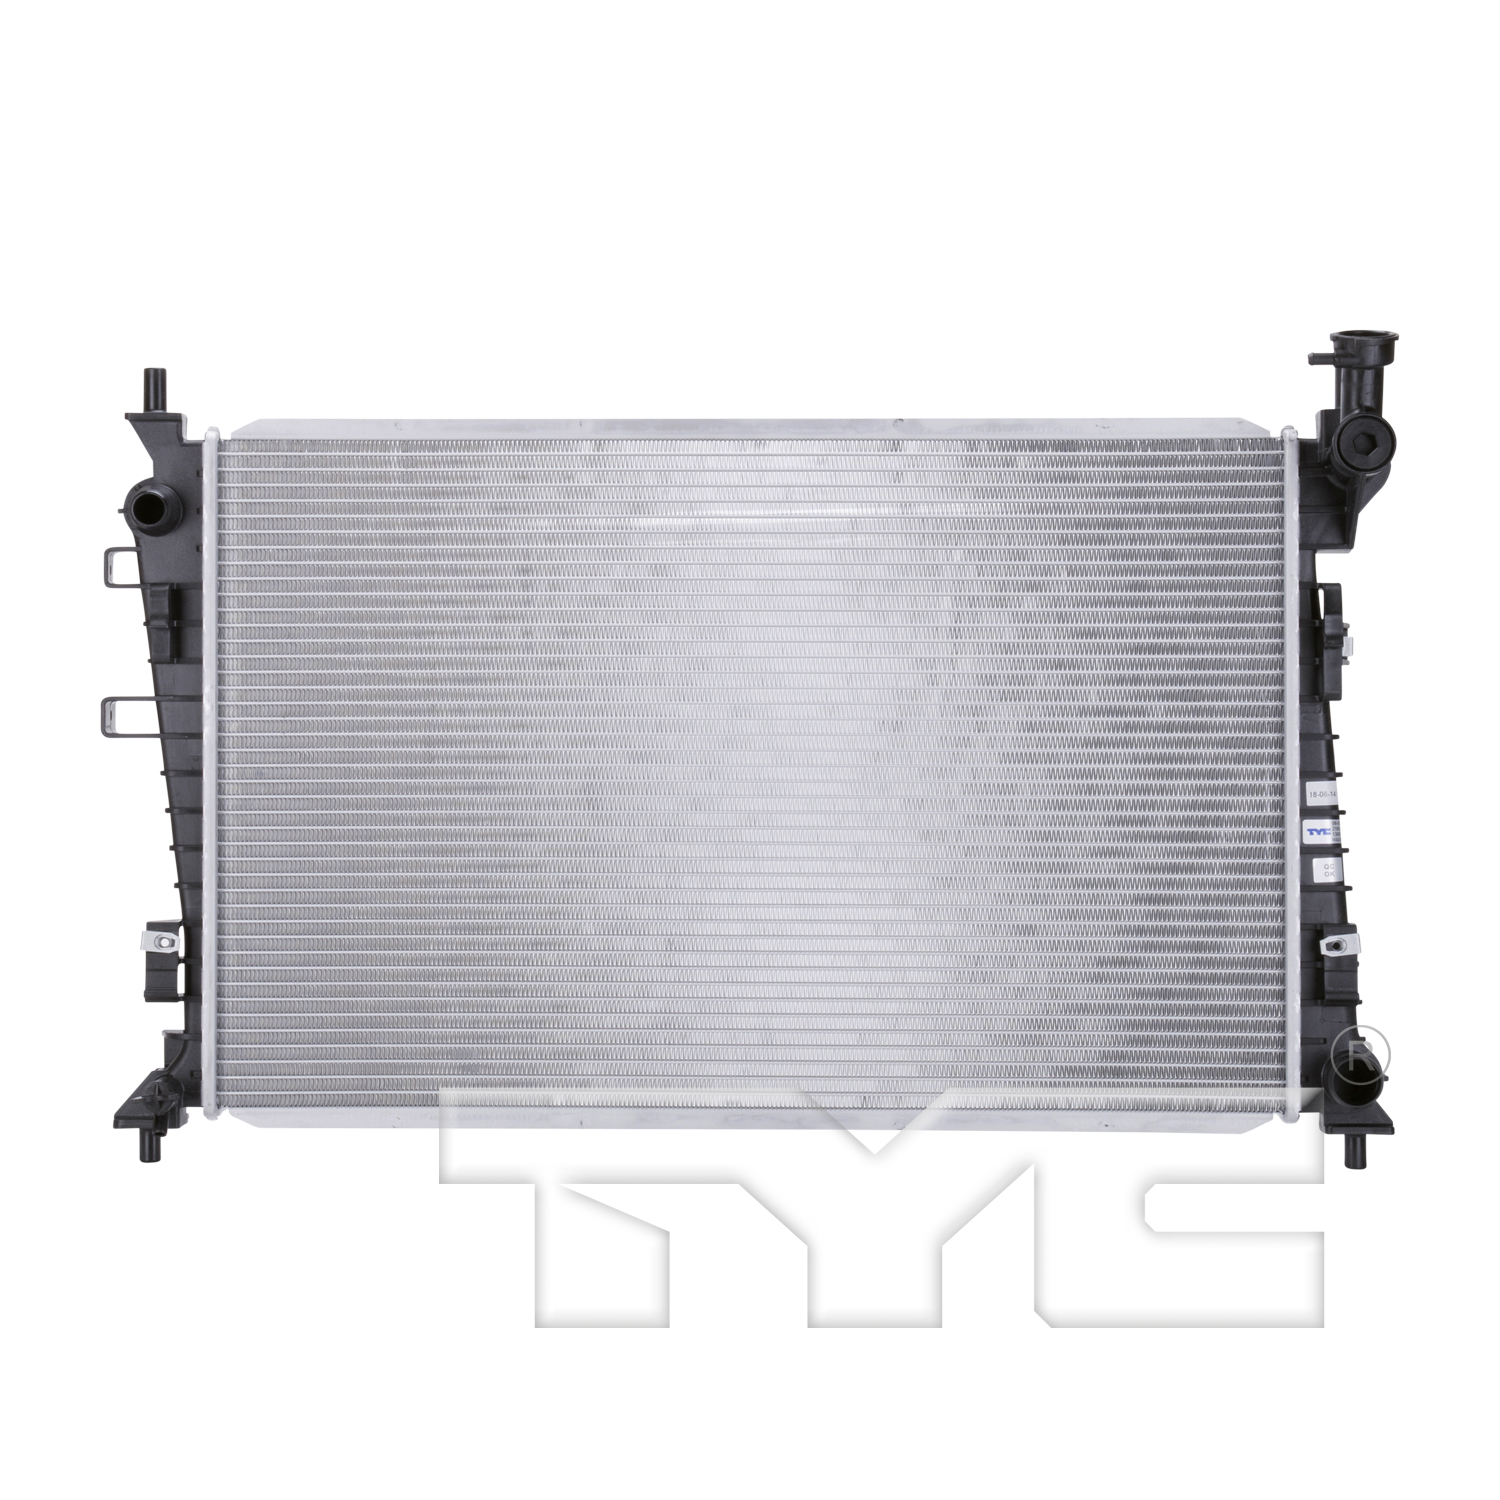 Aftermarket RADIATORS for FORD - FOCUS, FOCUS,08-11,Radiator assembly